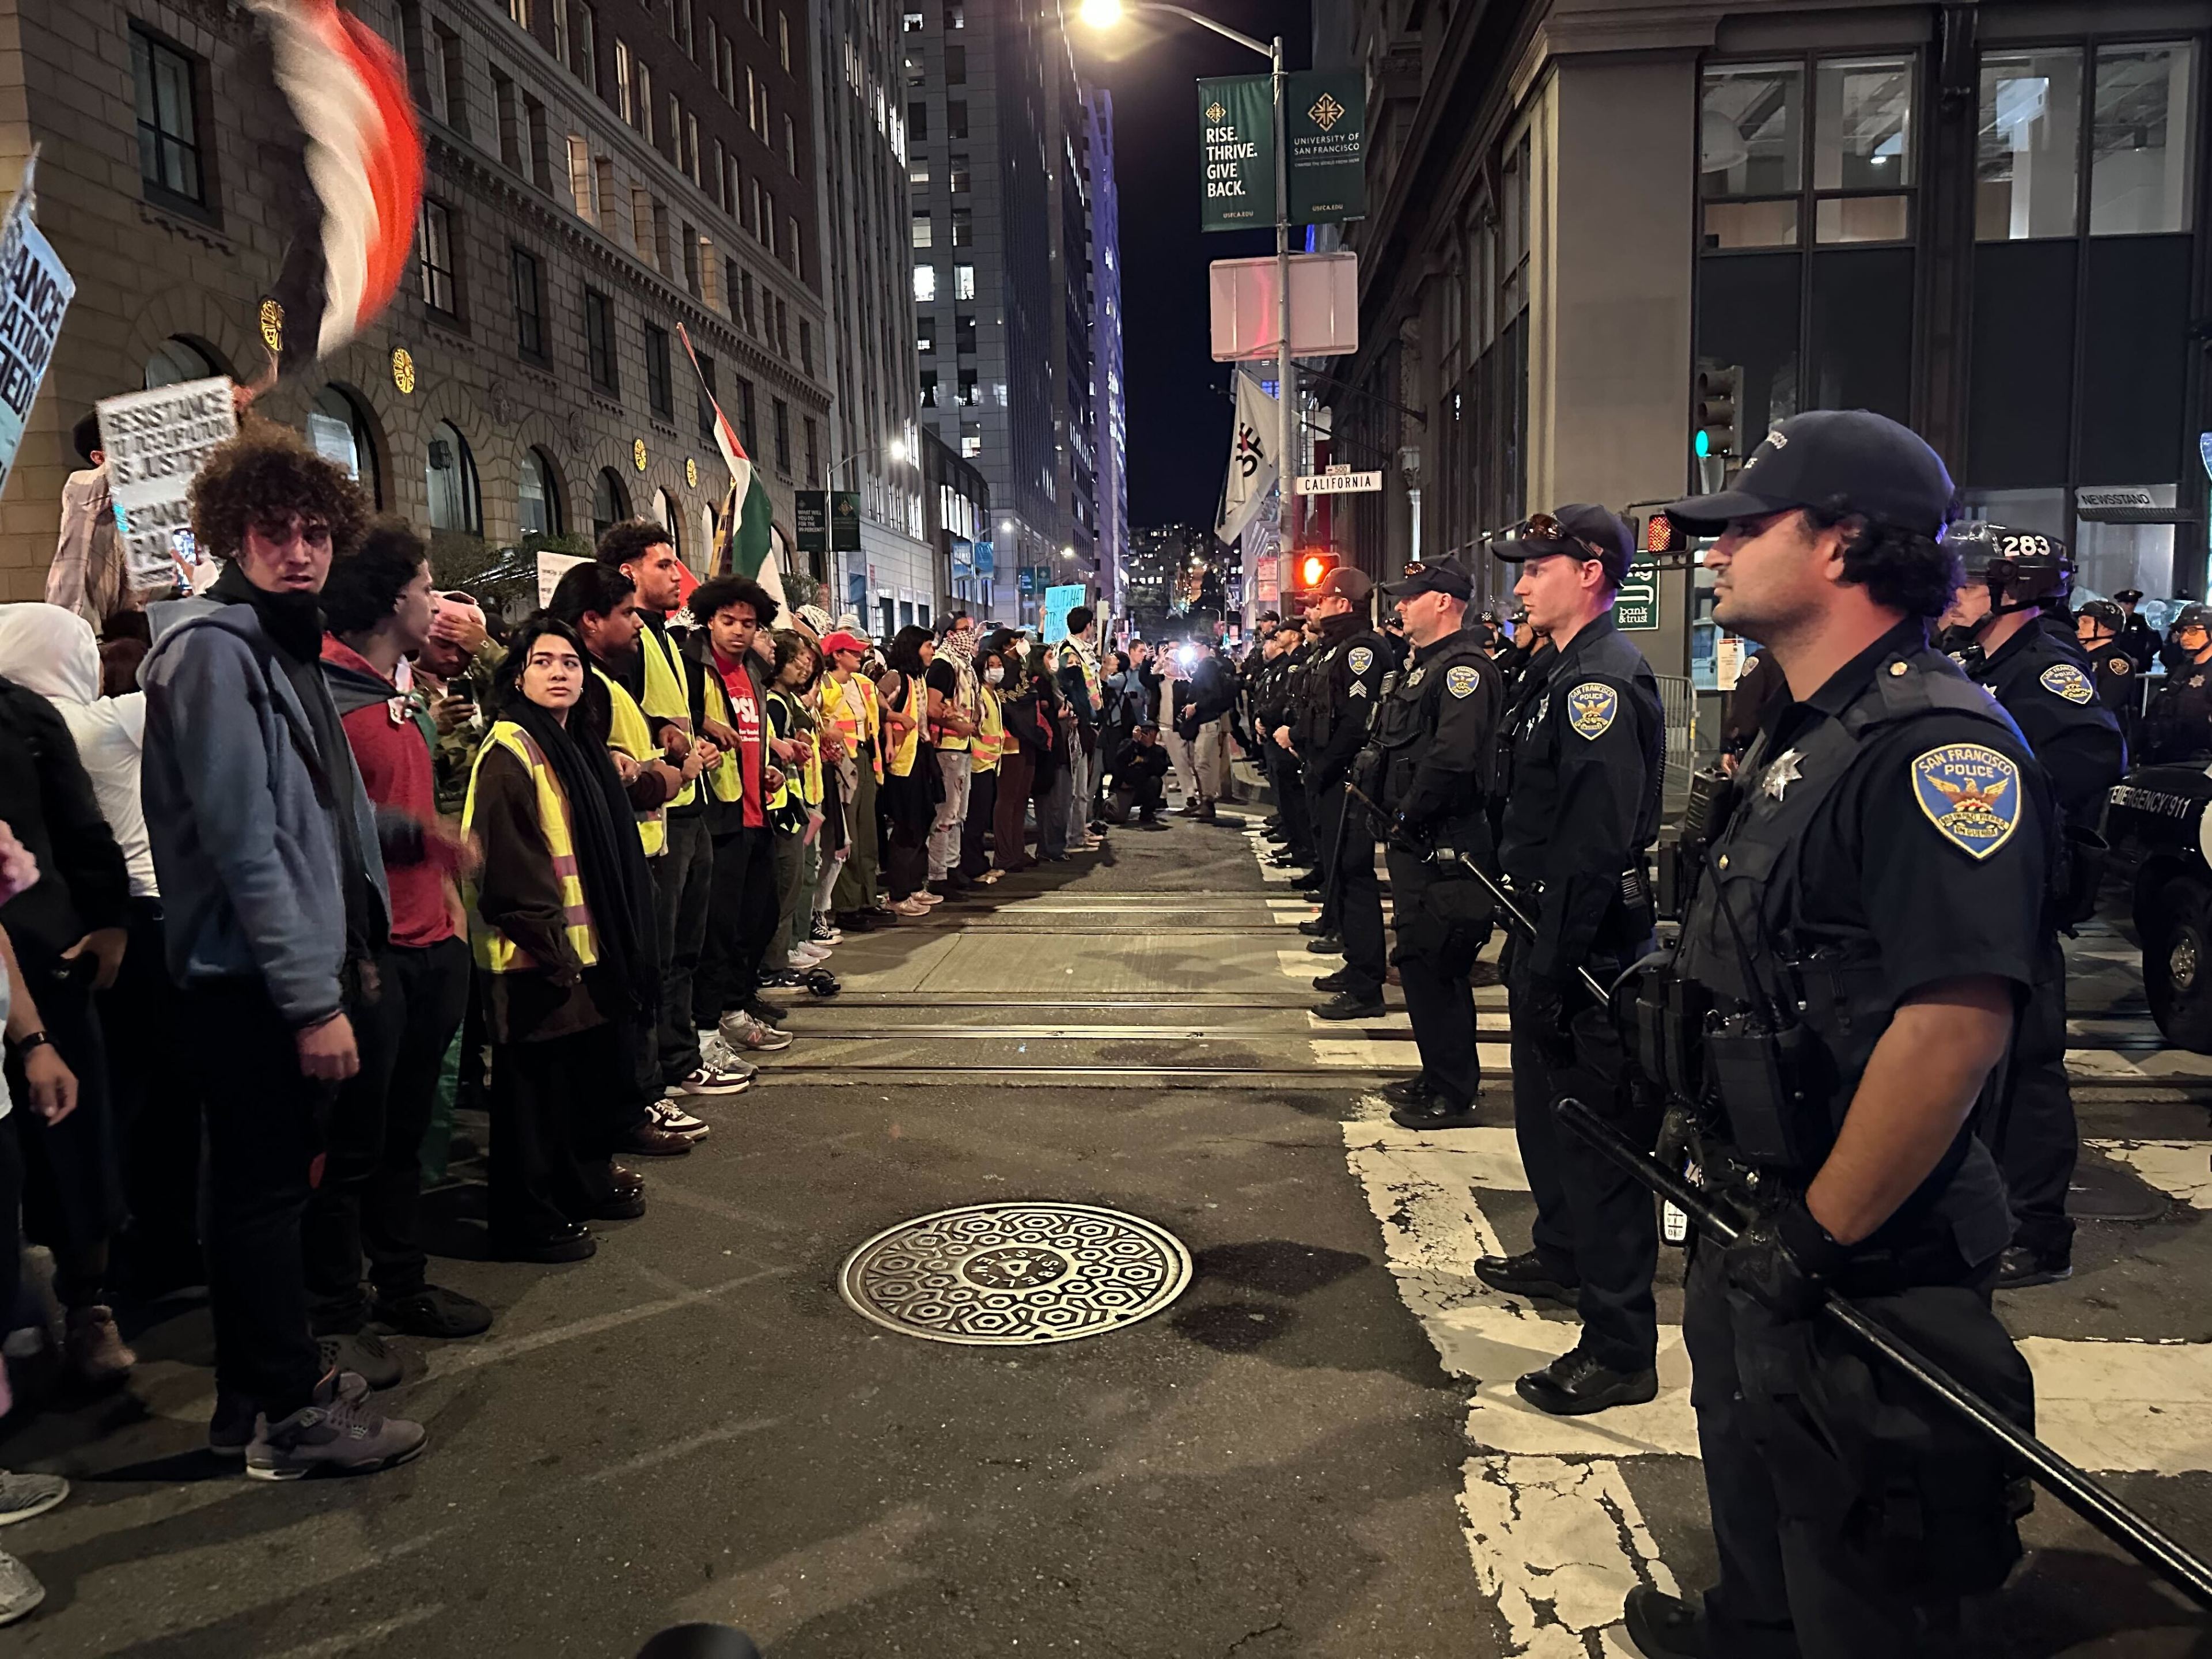 Protesters waving Palestinian flags stand in front of a row of San Francisco police officers on a city street.